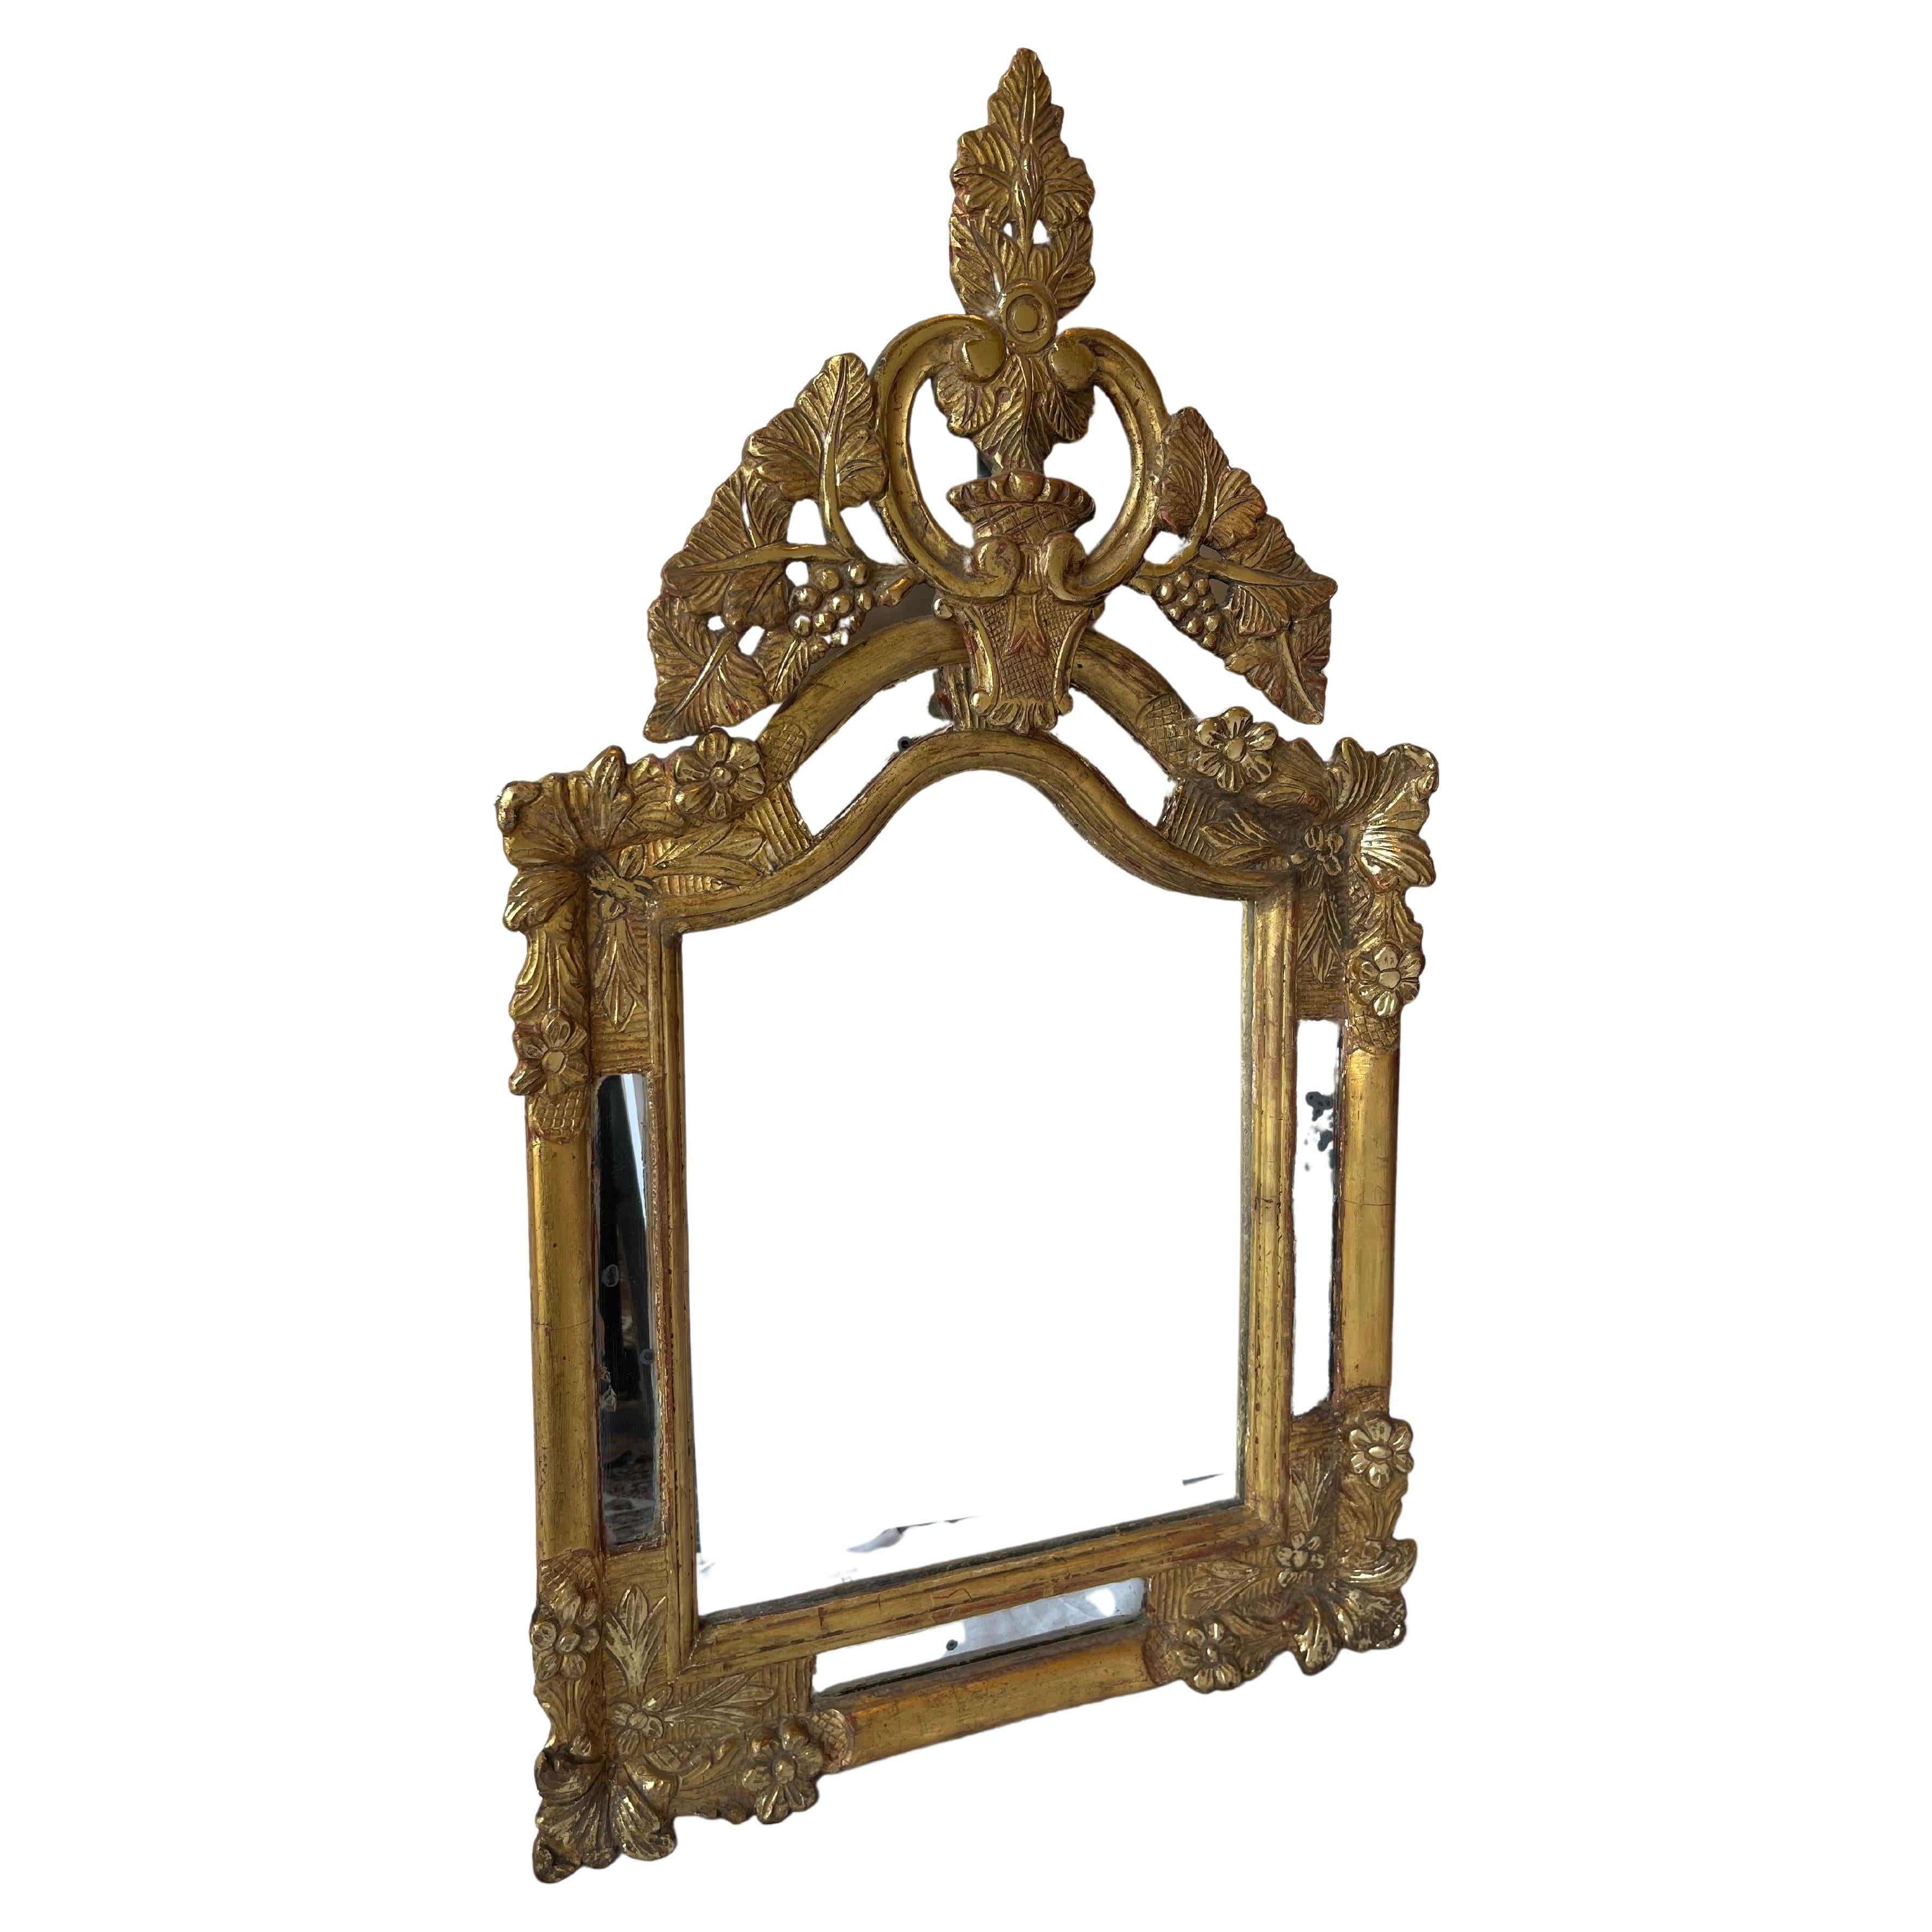 Golden wood mirror 19th cent. Hand carved. Fruits and flowers.
Probably mounted with antique and original parts. Antique mirror on both side.
The back has been changed.
 